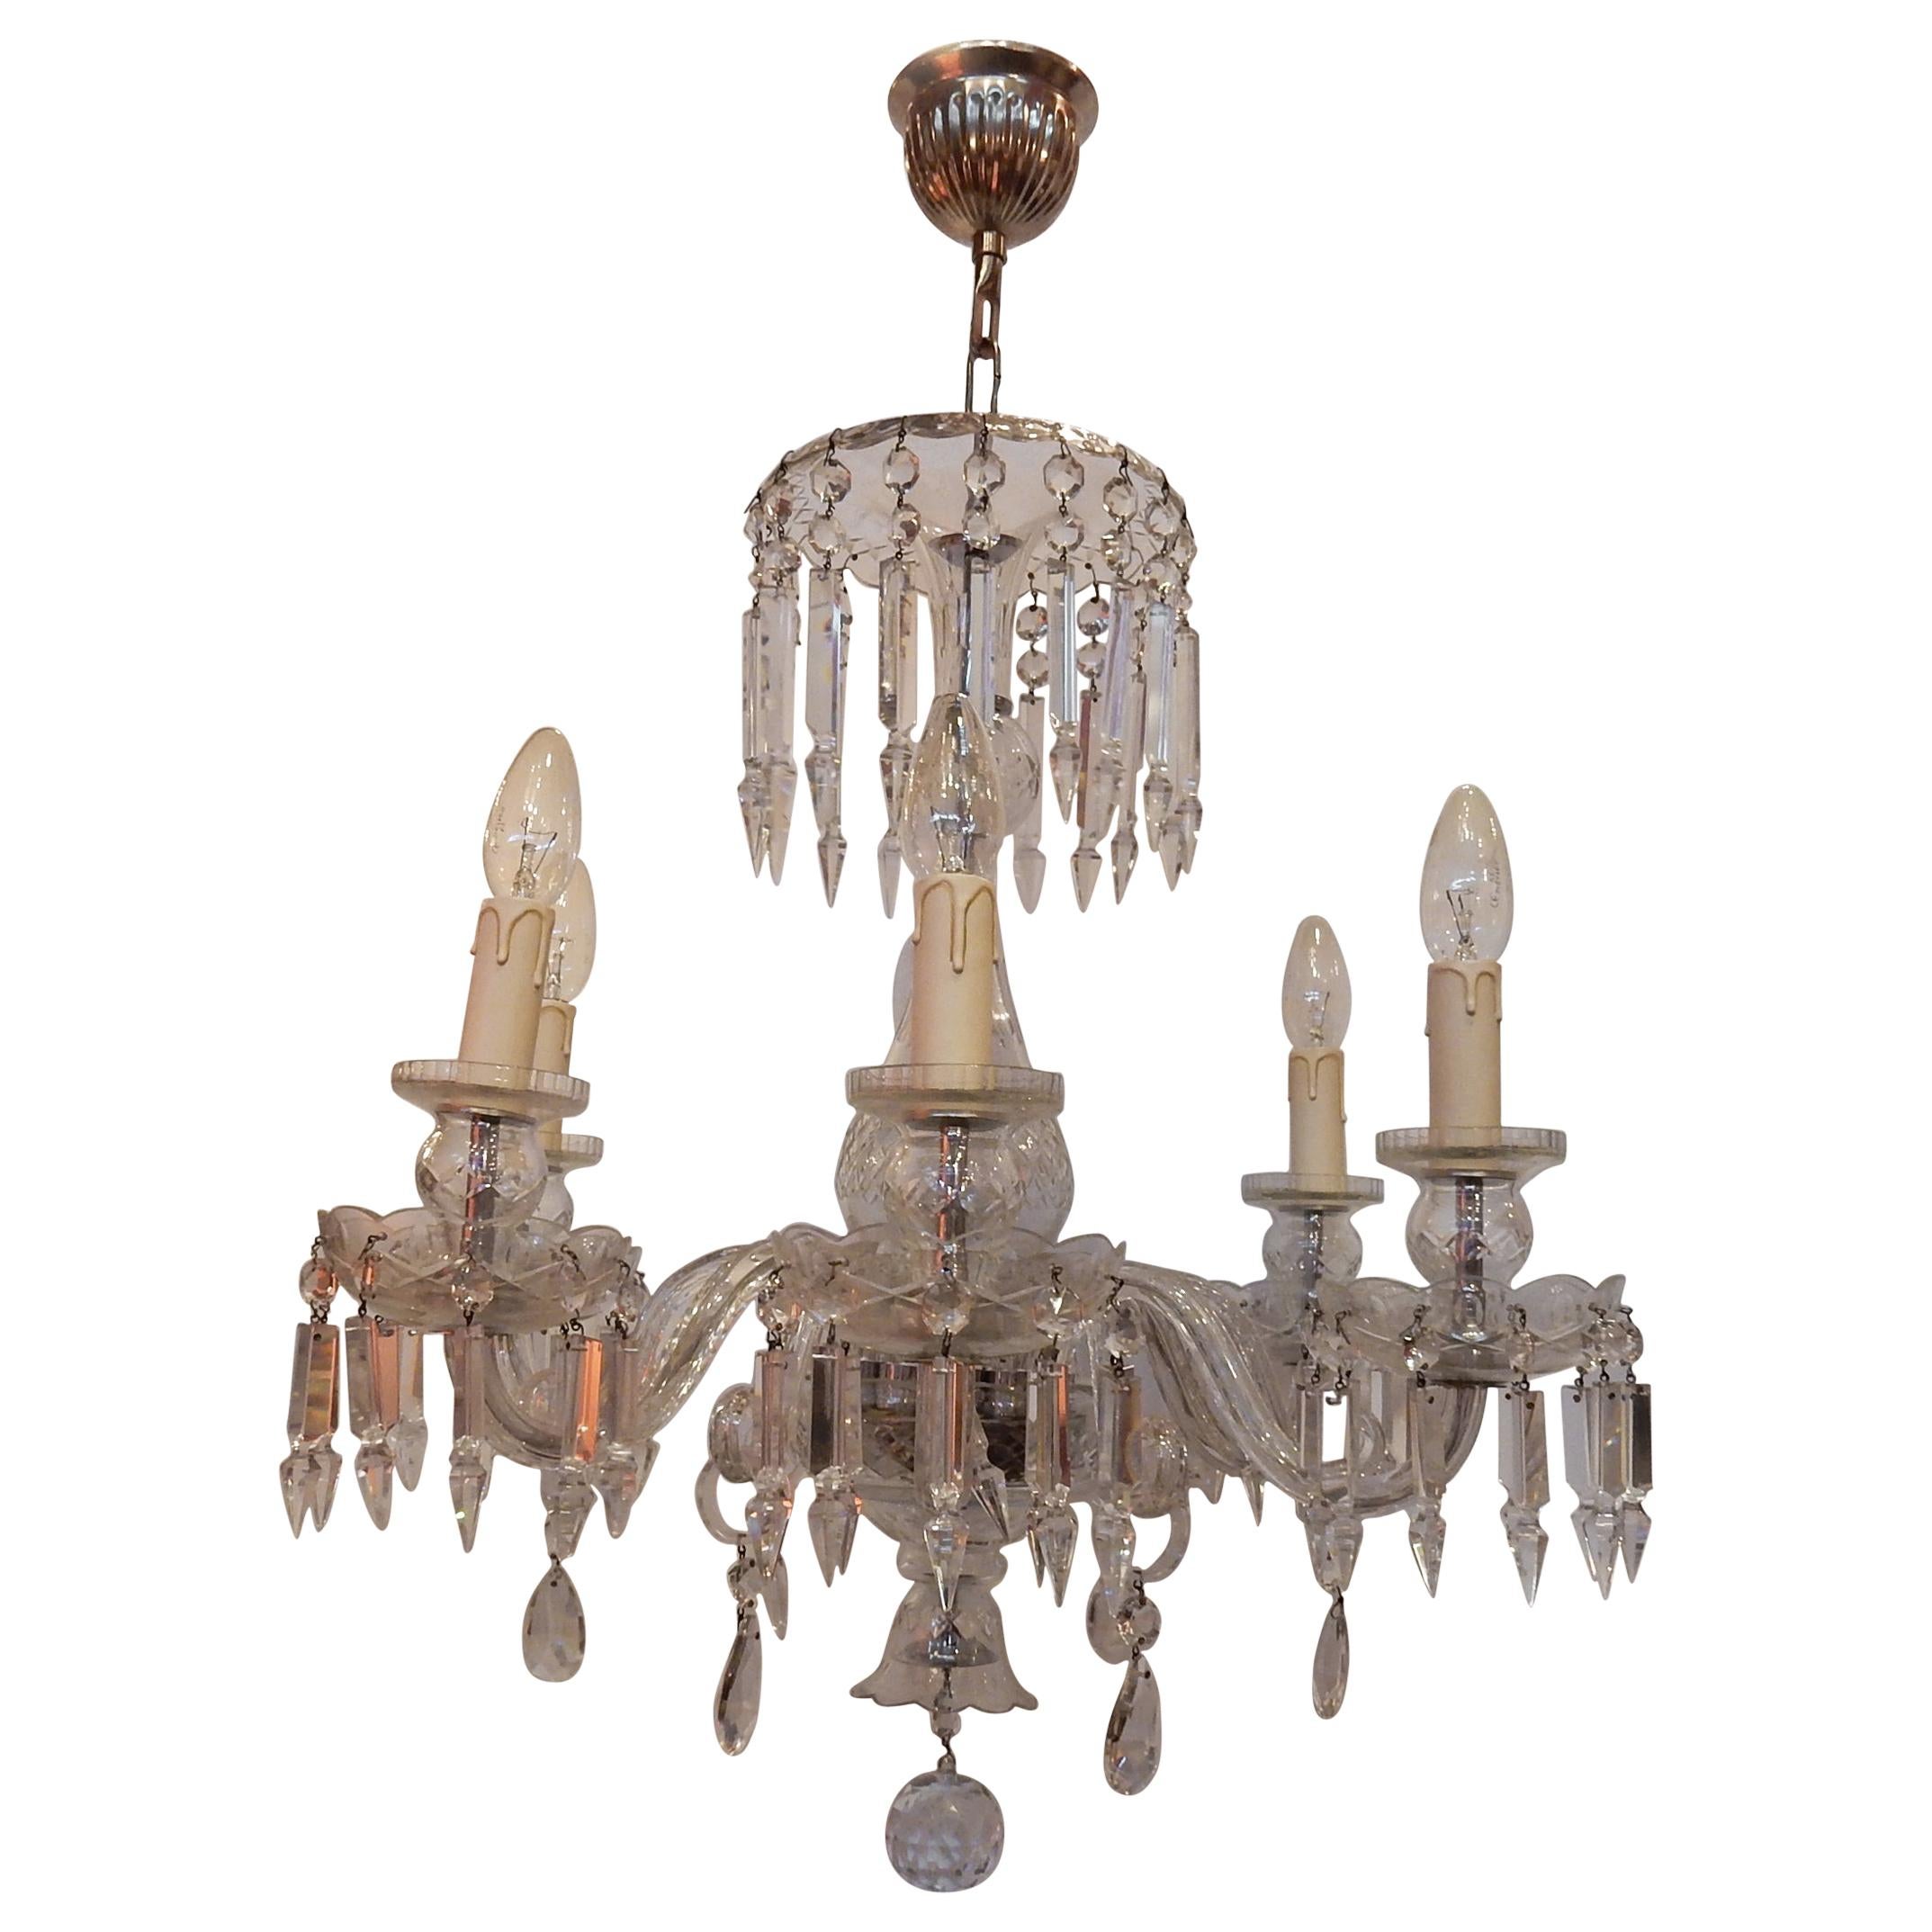 1920-1940 Bohémian or Baccarat Crystal Chandelier 6 Arms For Sale